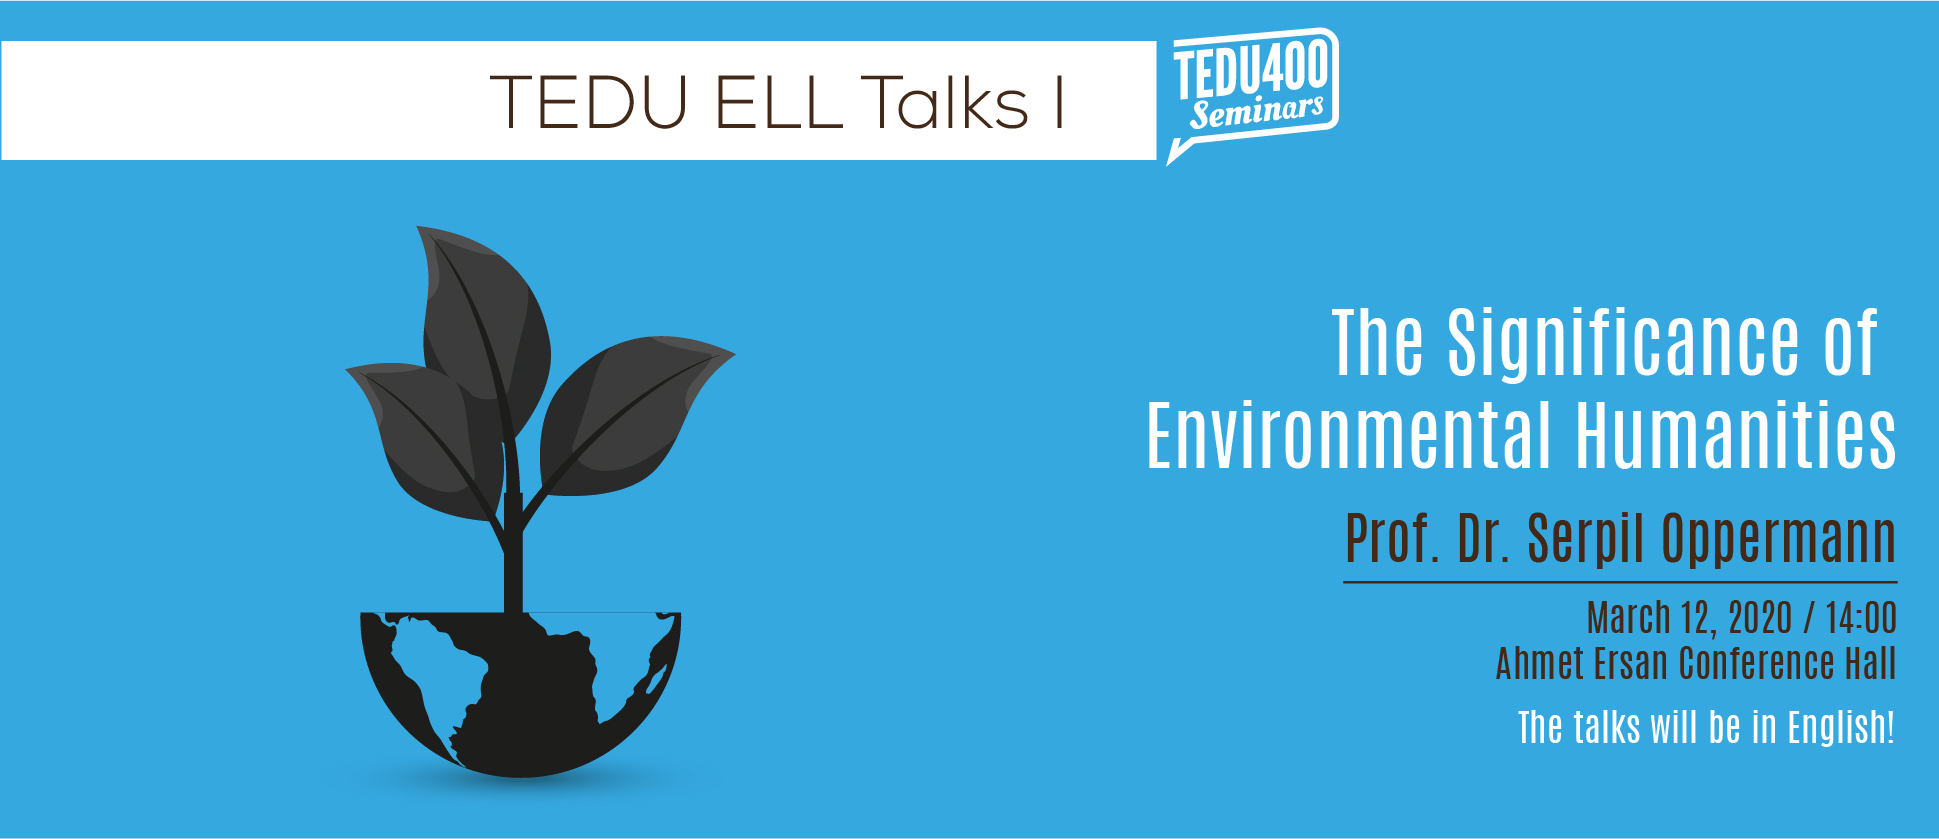 TEDU ELL Talks The Significance of Environmental Humanities TED